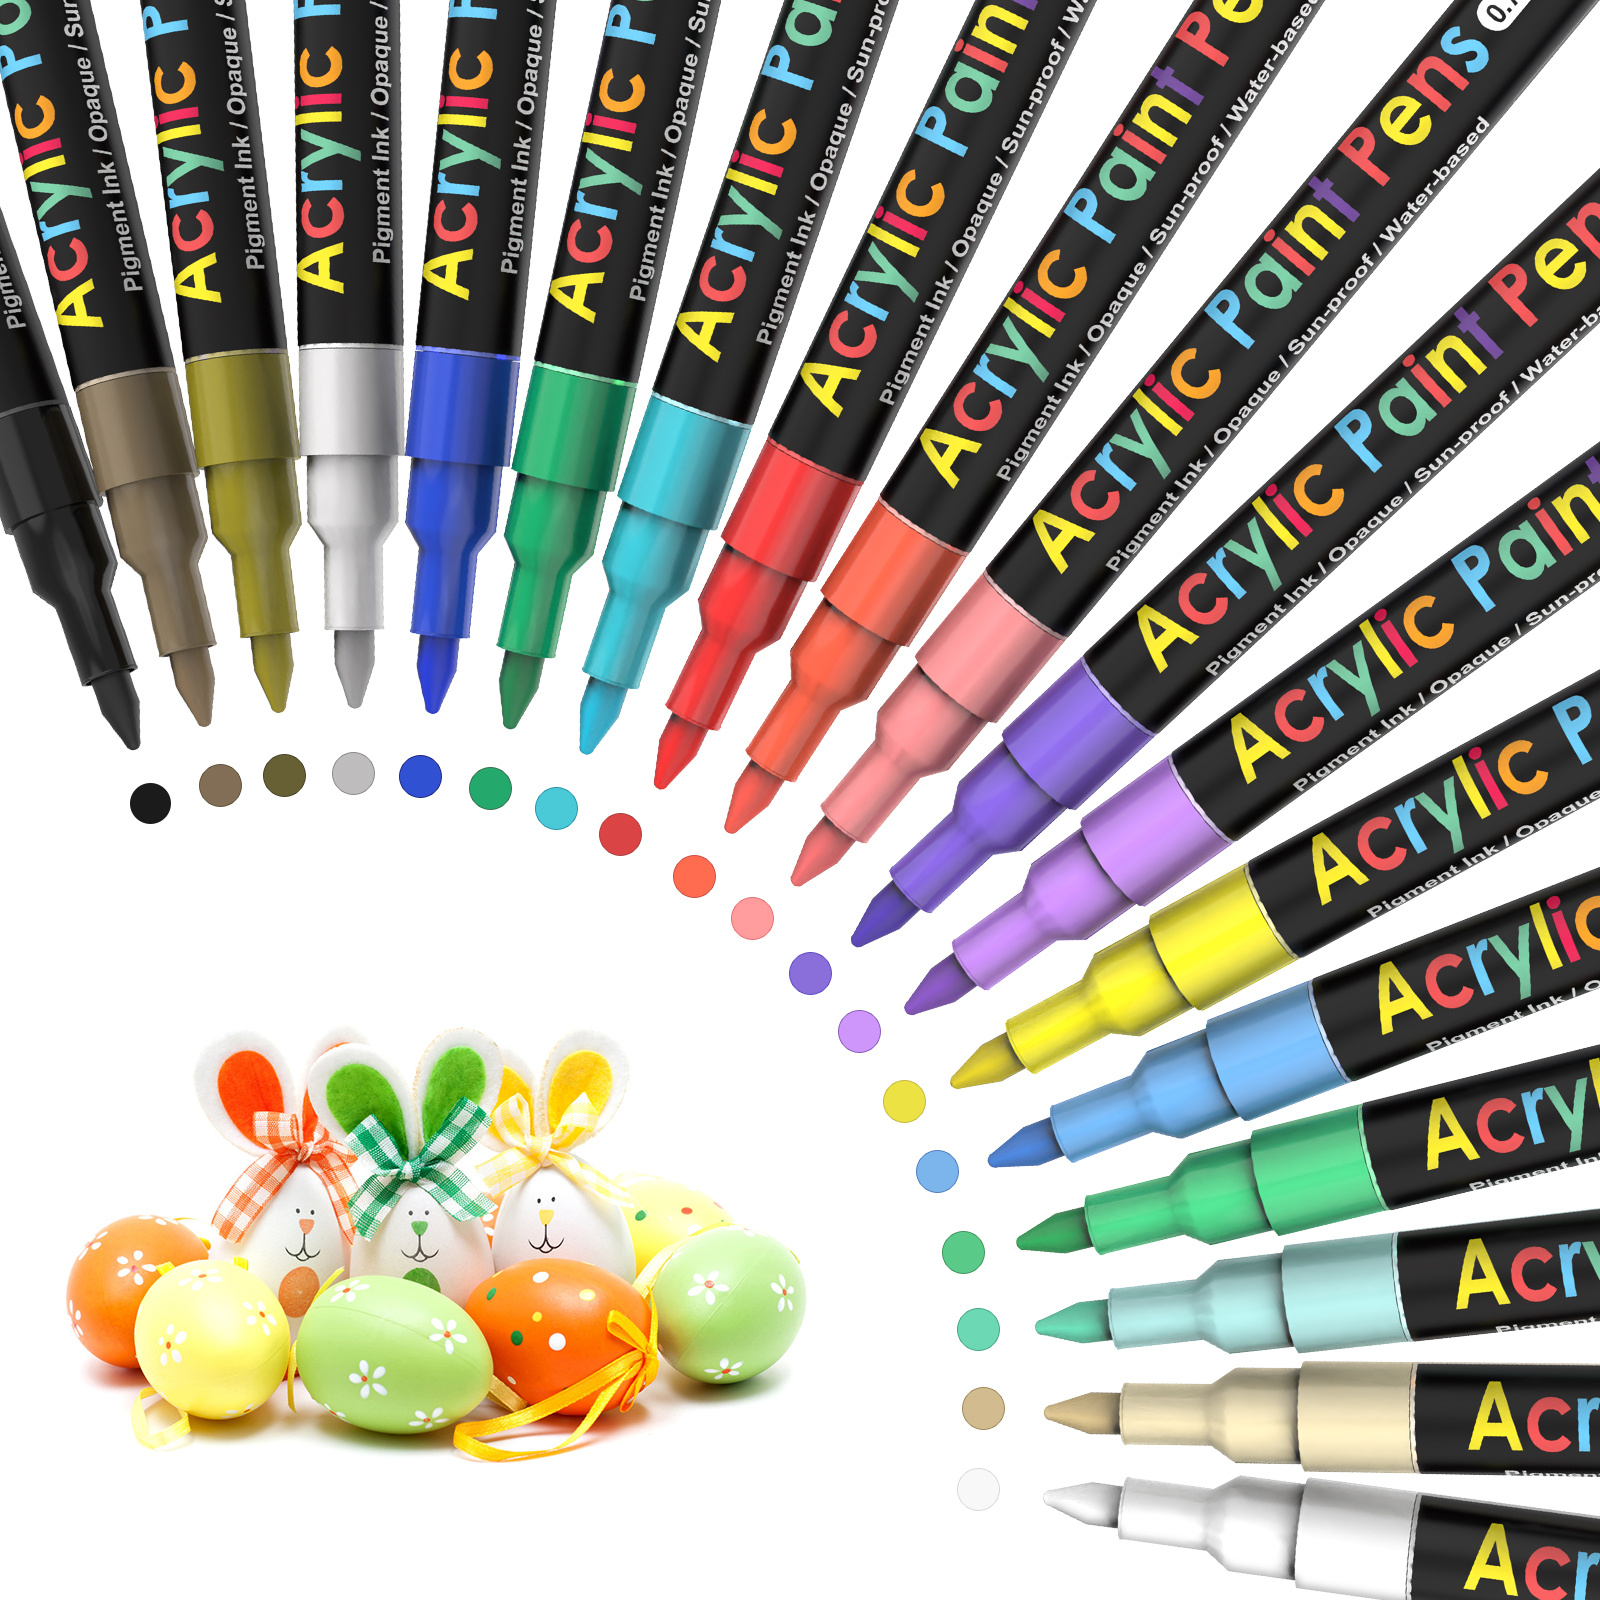 Acrylic Paint Pens for Rock Painting, Stone, Ceramic, Glass, Wood, Mugs,  Metal, Fabric, Canvas (30 Pack) 28 Assorted Colors + Extra Black & White  Acrylic Paint Markers. Extra Fine Tip 0.7mm price